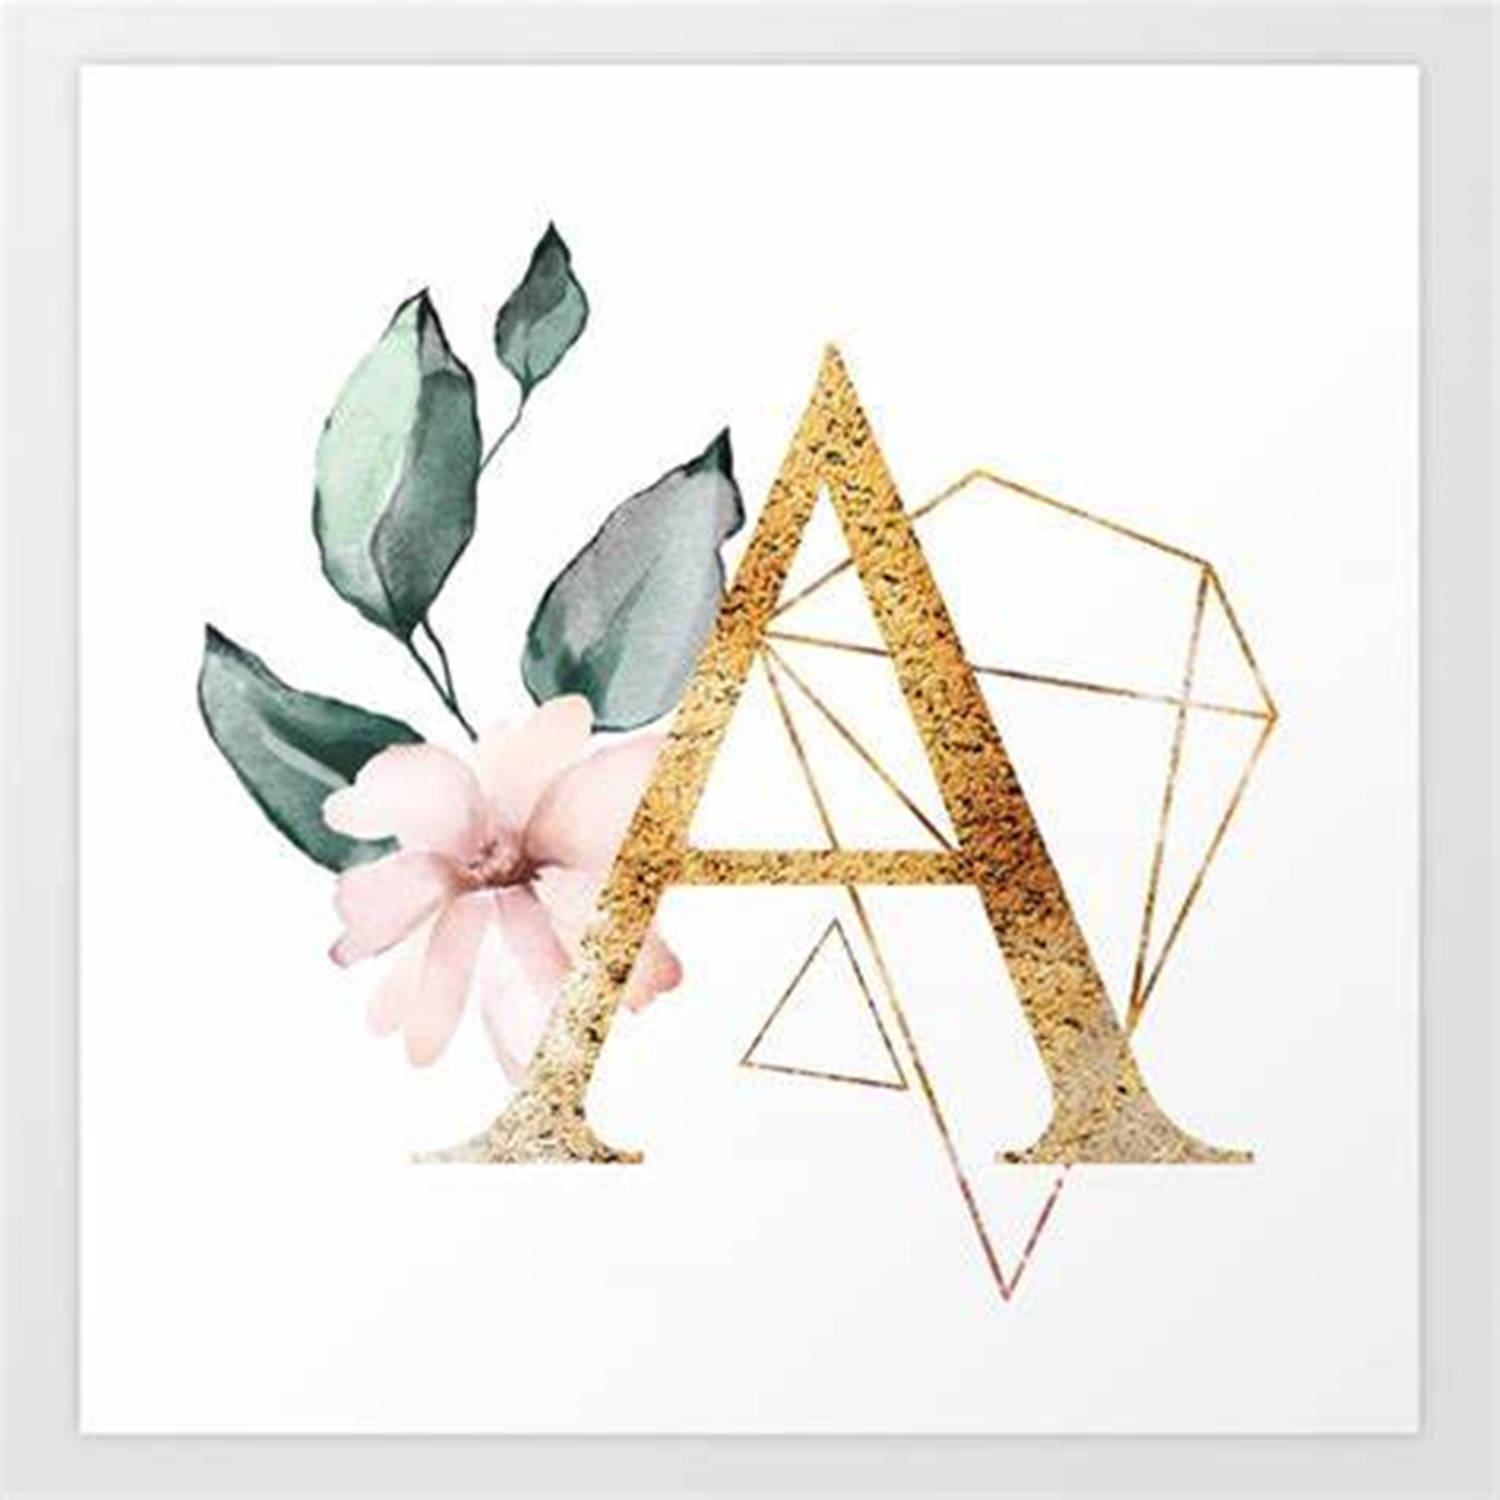 Extravagant Golden Capital Alphabet Letter A With Brilliant Diamonds And Adorned With Elegant Flowers Wallpaper